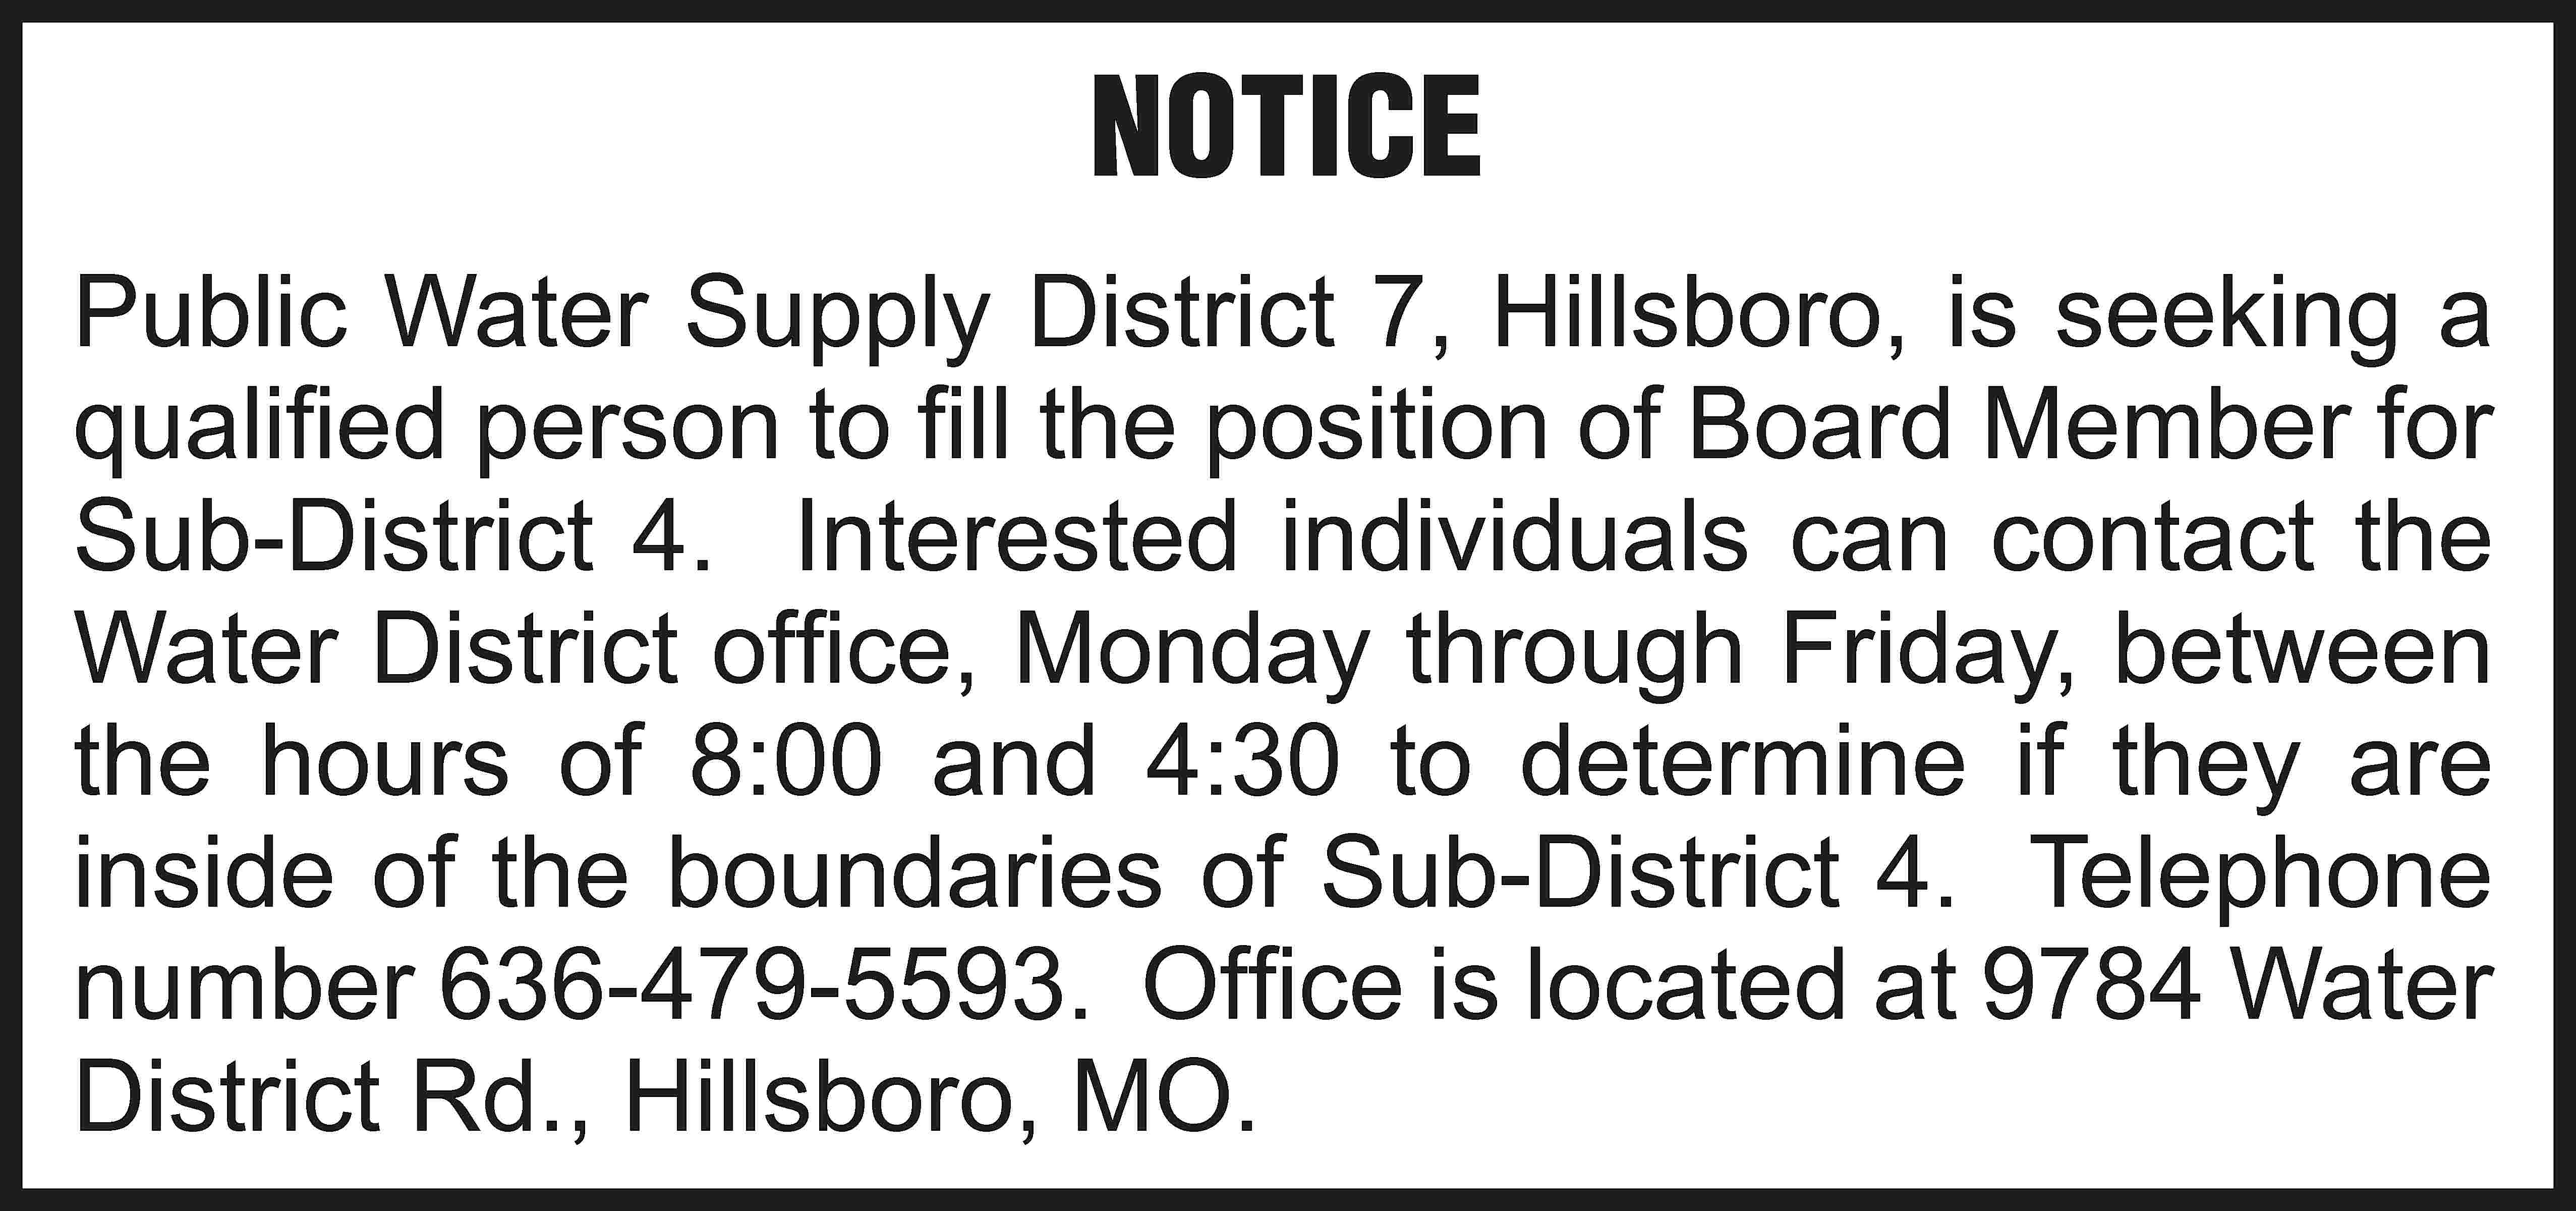 NOTICE Public Water Supply District  NOTICE Public Water Supply District 7, Hillsboro, is seeking a qualified person to fill the position of Board Member for Sub-District 4. Interested individuals can contact the Water District office, Monday through Friday, between the hours of 8:00 and 4:30 to determine if they are inside of the boundaries of Sub-District 4. Telephone number 636-479-5593. Office is located at 9784 Water District Rd., Hillsboro, MO.